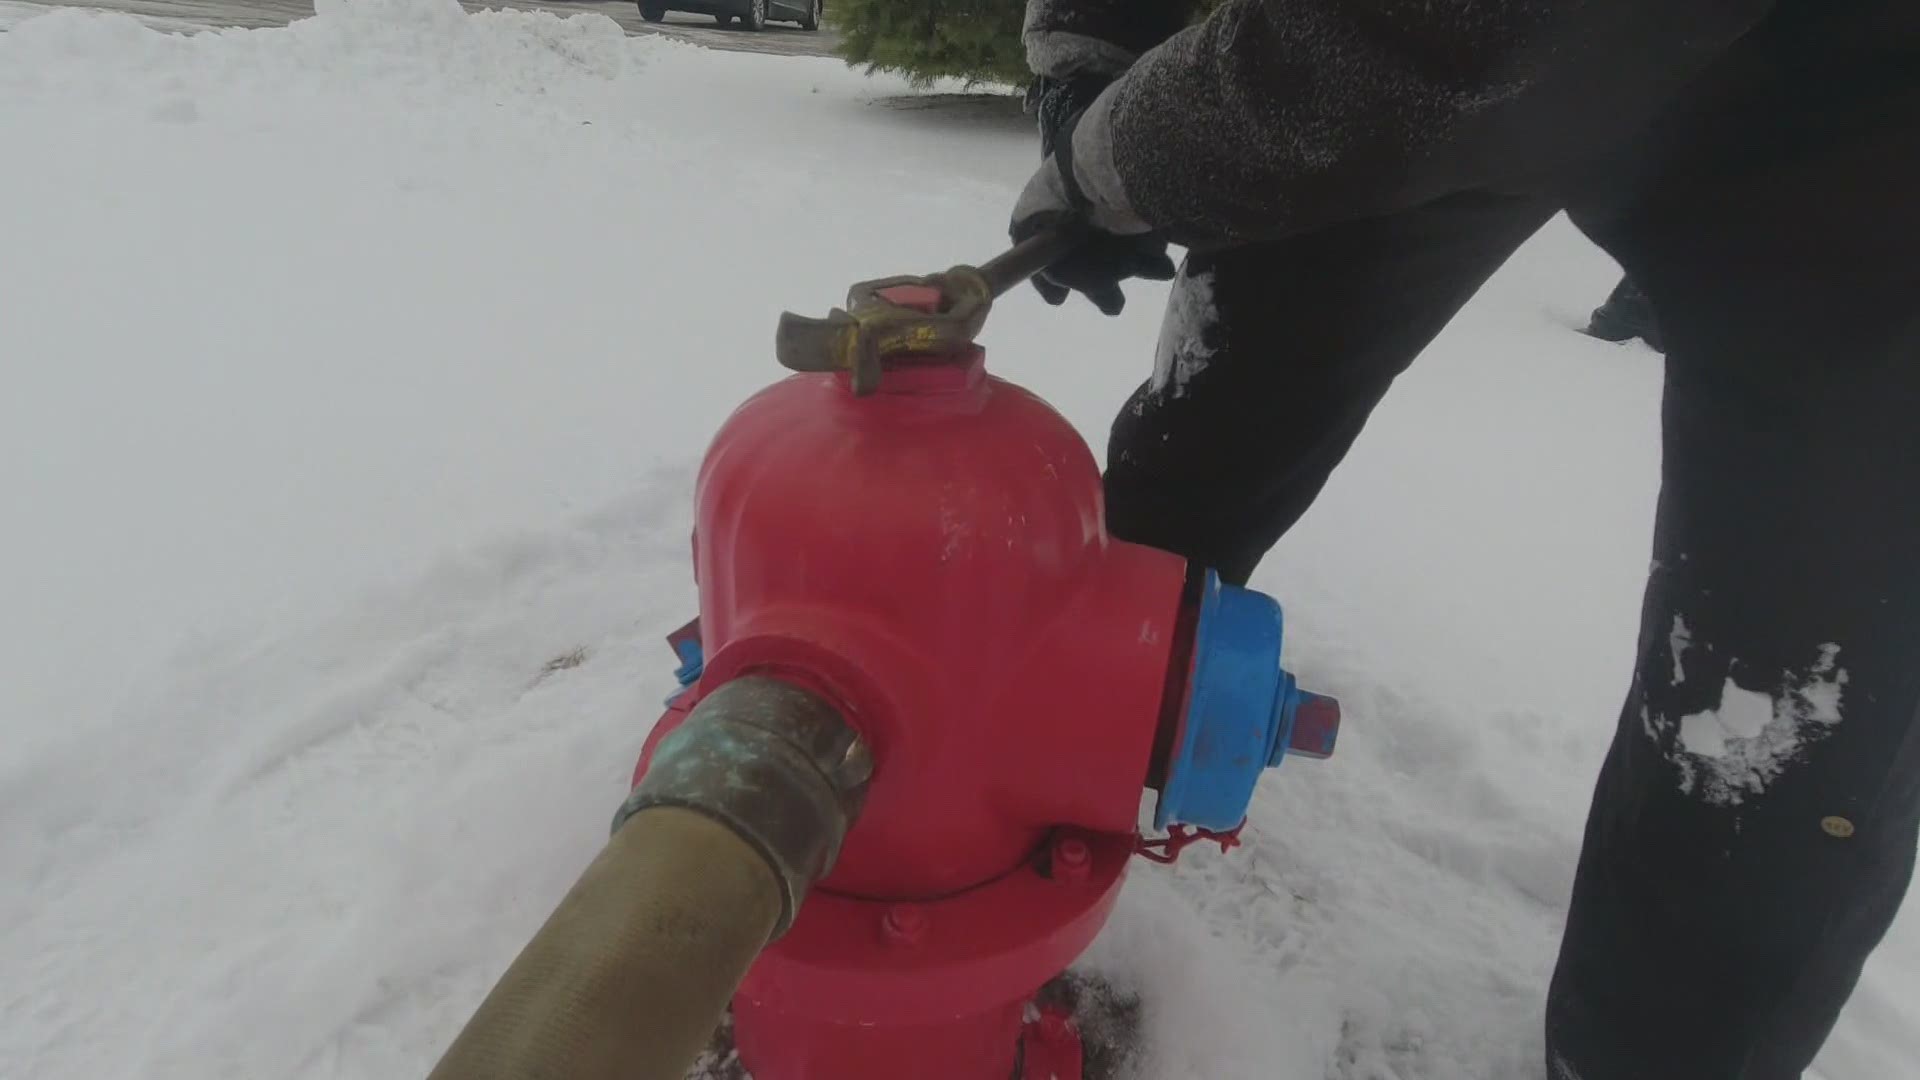 While Mother Nature is delivering yet another snowless winter to Michigan, four friends in Whitehall bought their own snow maker, insuring the season isn't lost.